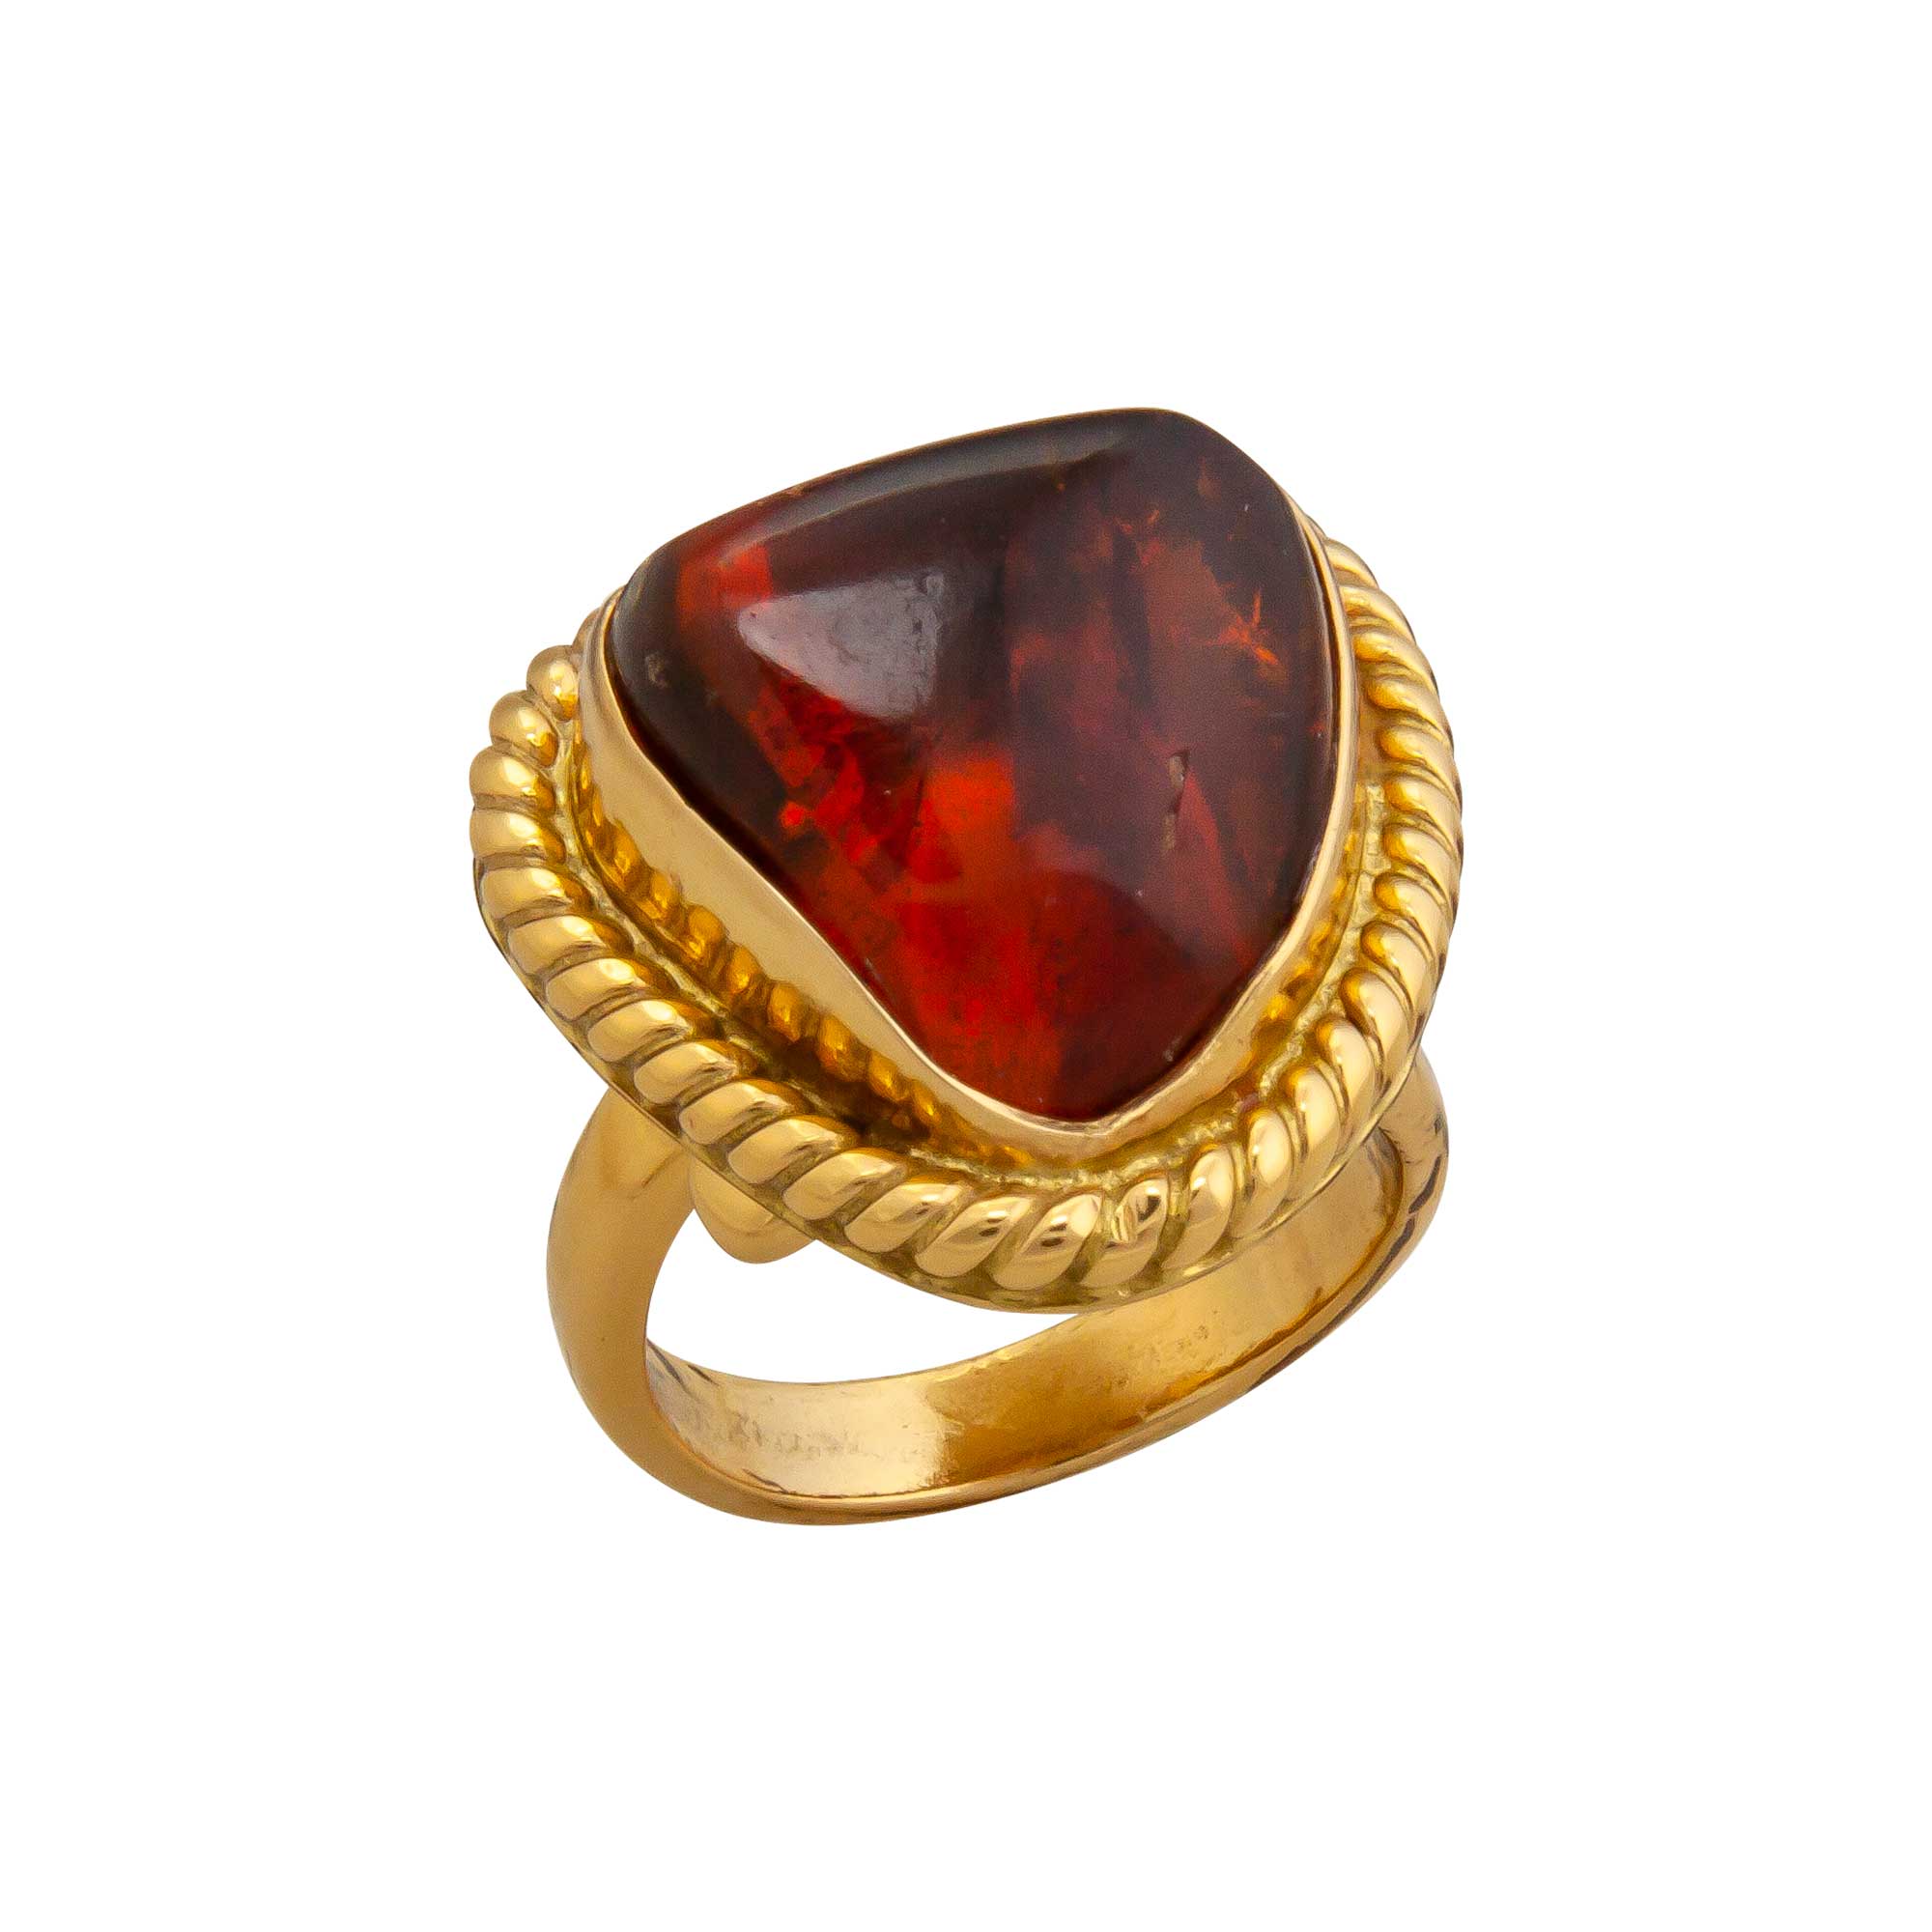 Charles Albert Jewelry - Alchemia Amber Adjustable Rope Ring - Front View